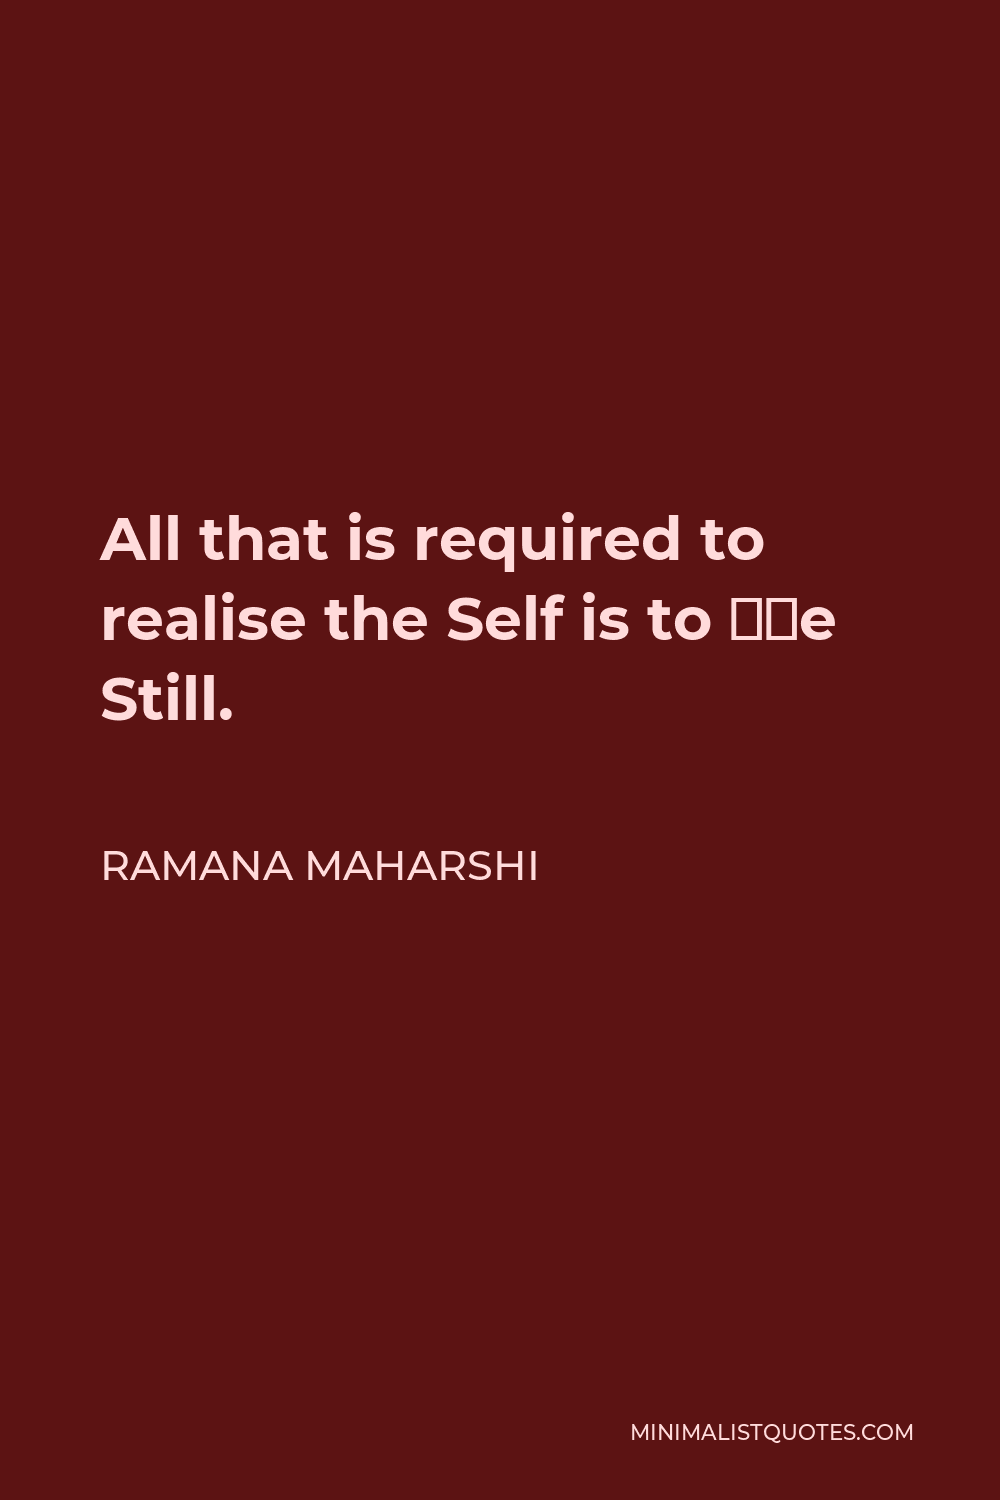 Ramana Maharshi Quote - All that is required to realise the Self is to “Be Still.